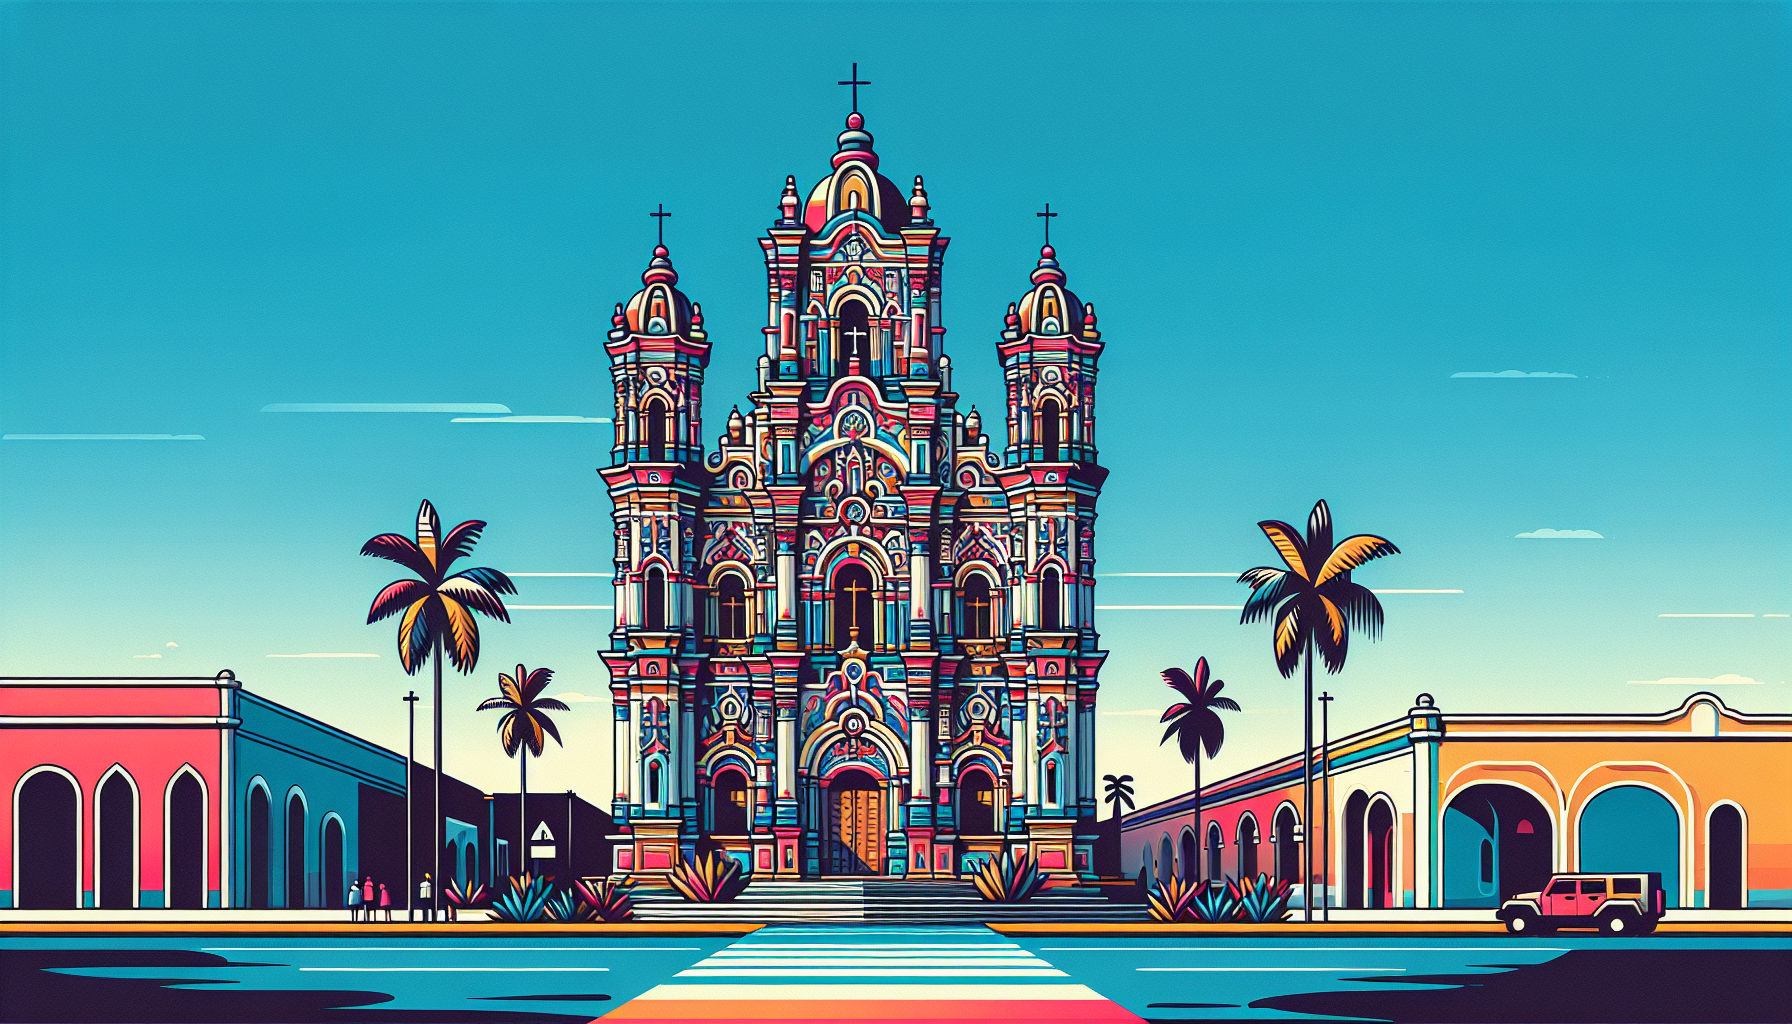 Create an image of a stunning church in Cancun, featuring intricate architectural details, vibrant colors, and a backdrop of a clear blue sky. The church should showcase a blend of traditional Mexican